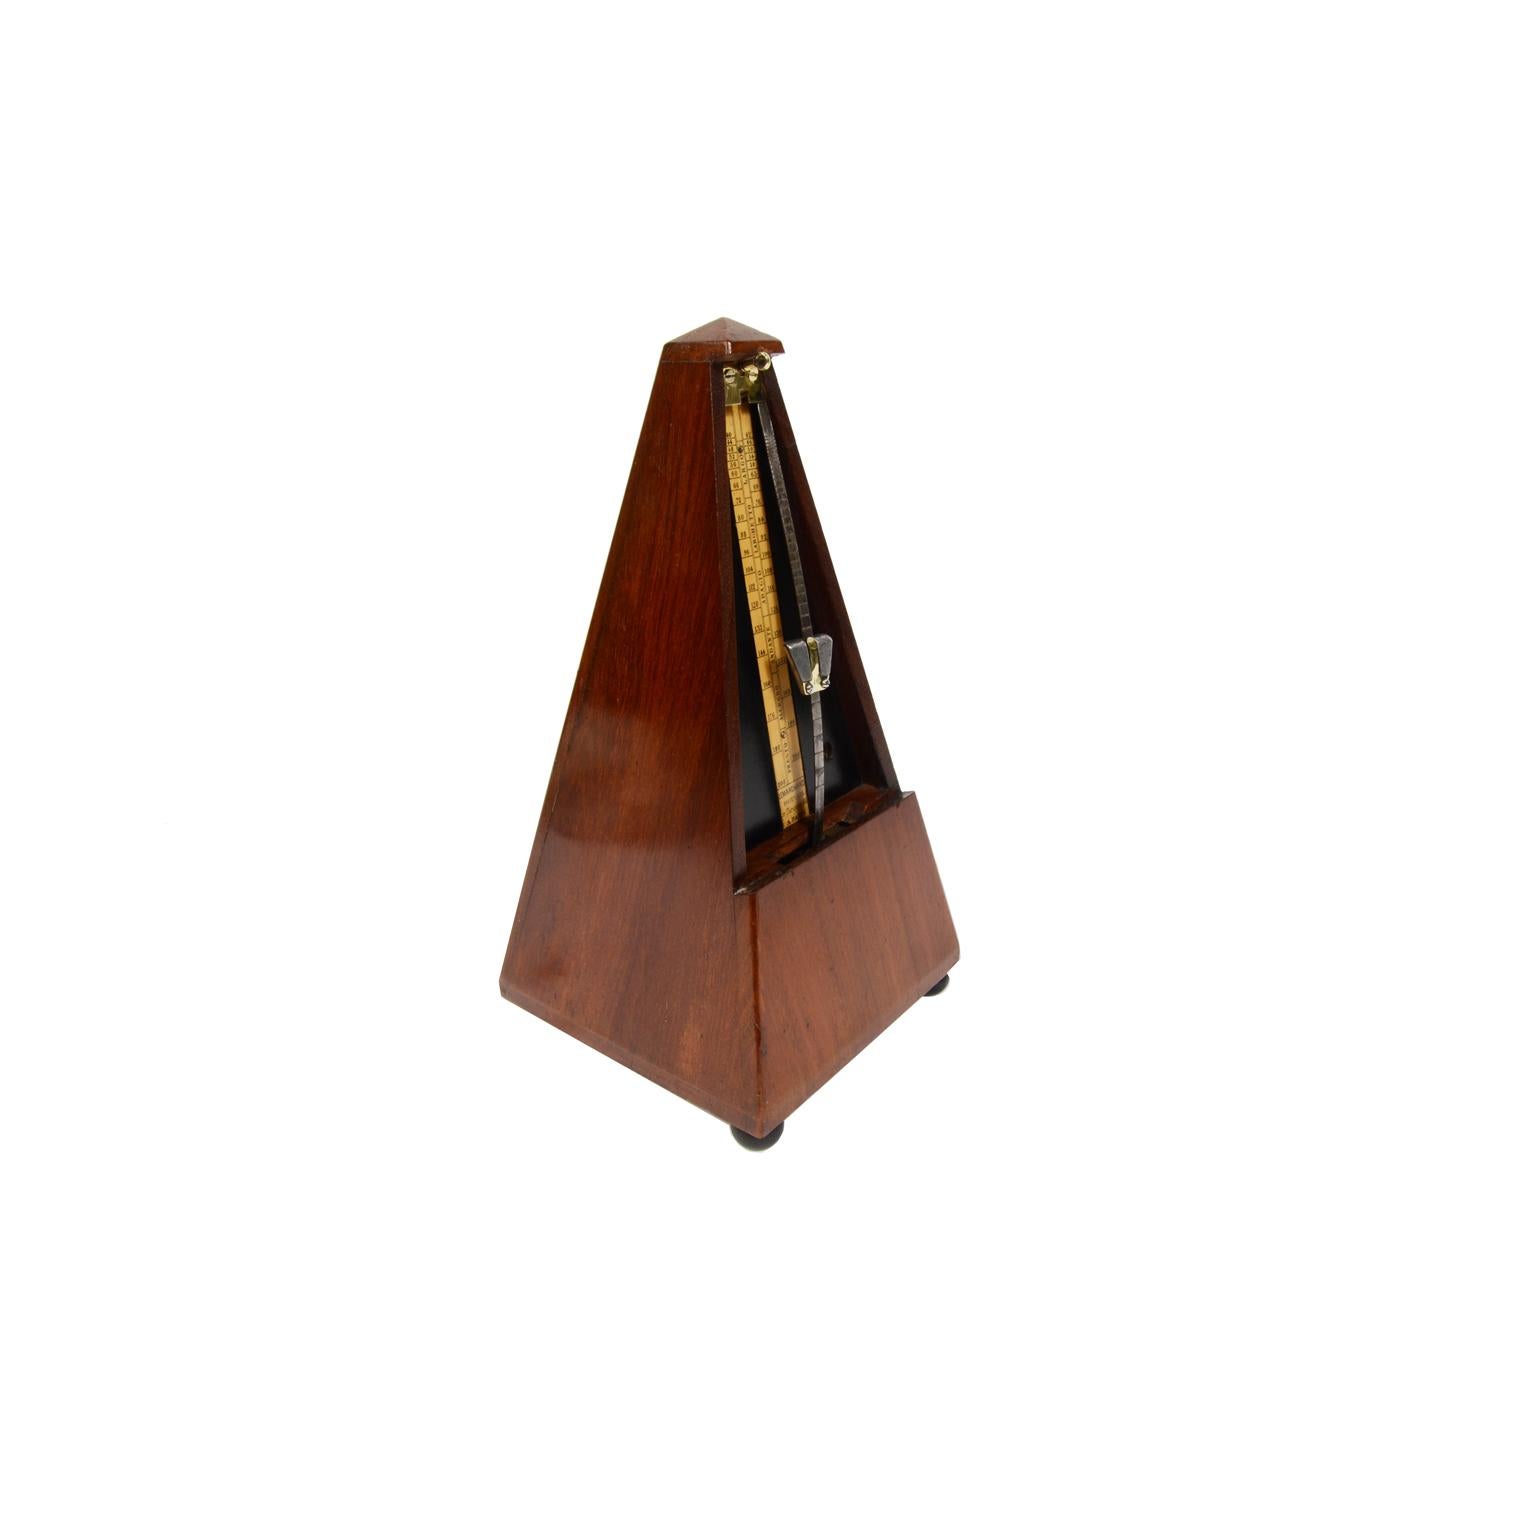 Mechanical Metronome by the Maison Lemarchand Paris Early 1900s Oak Wood 1